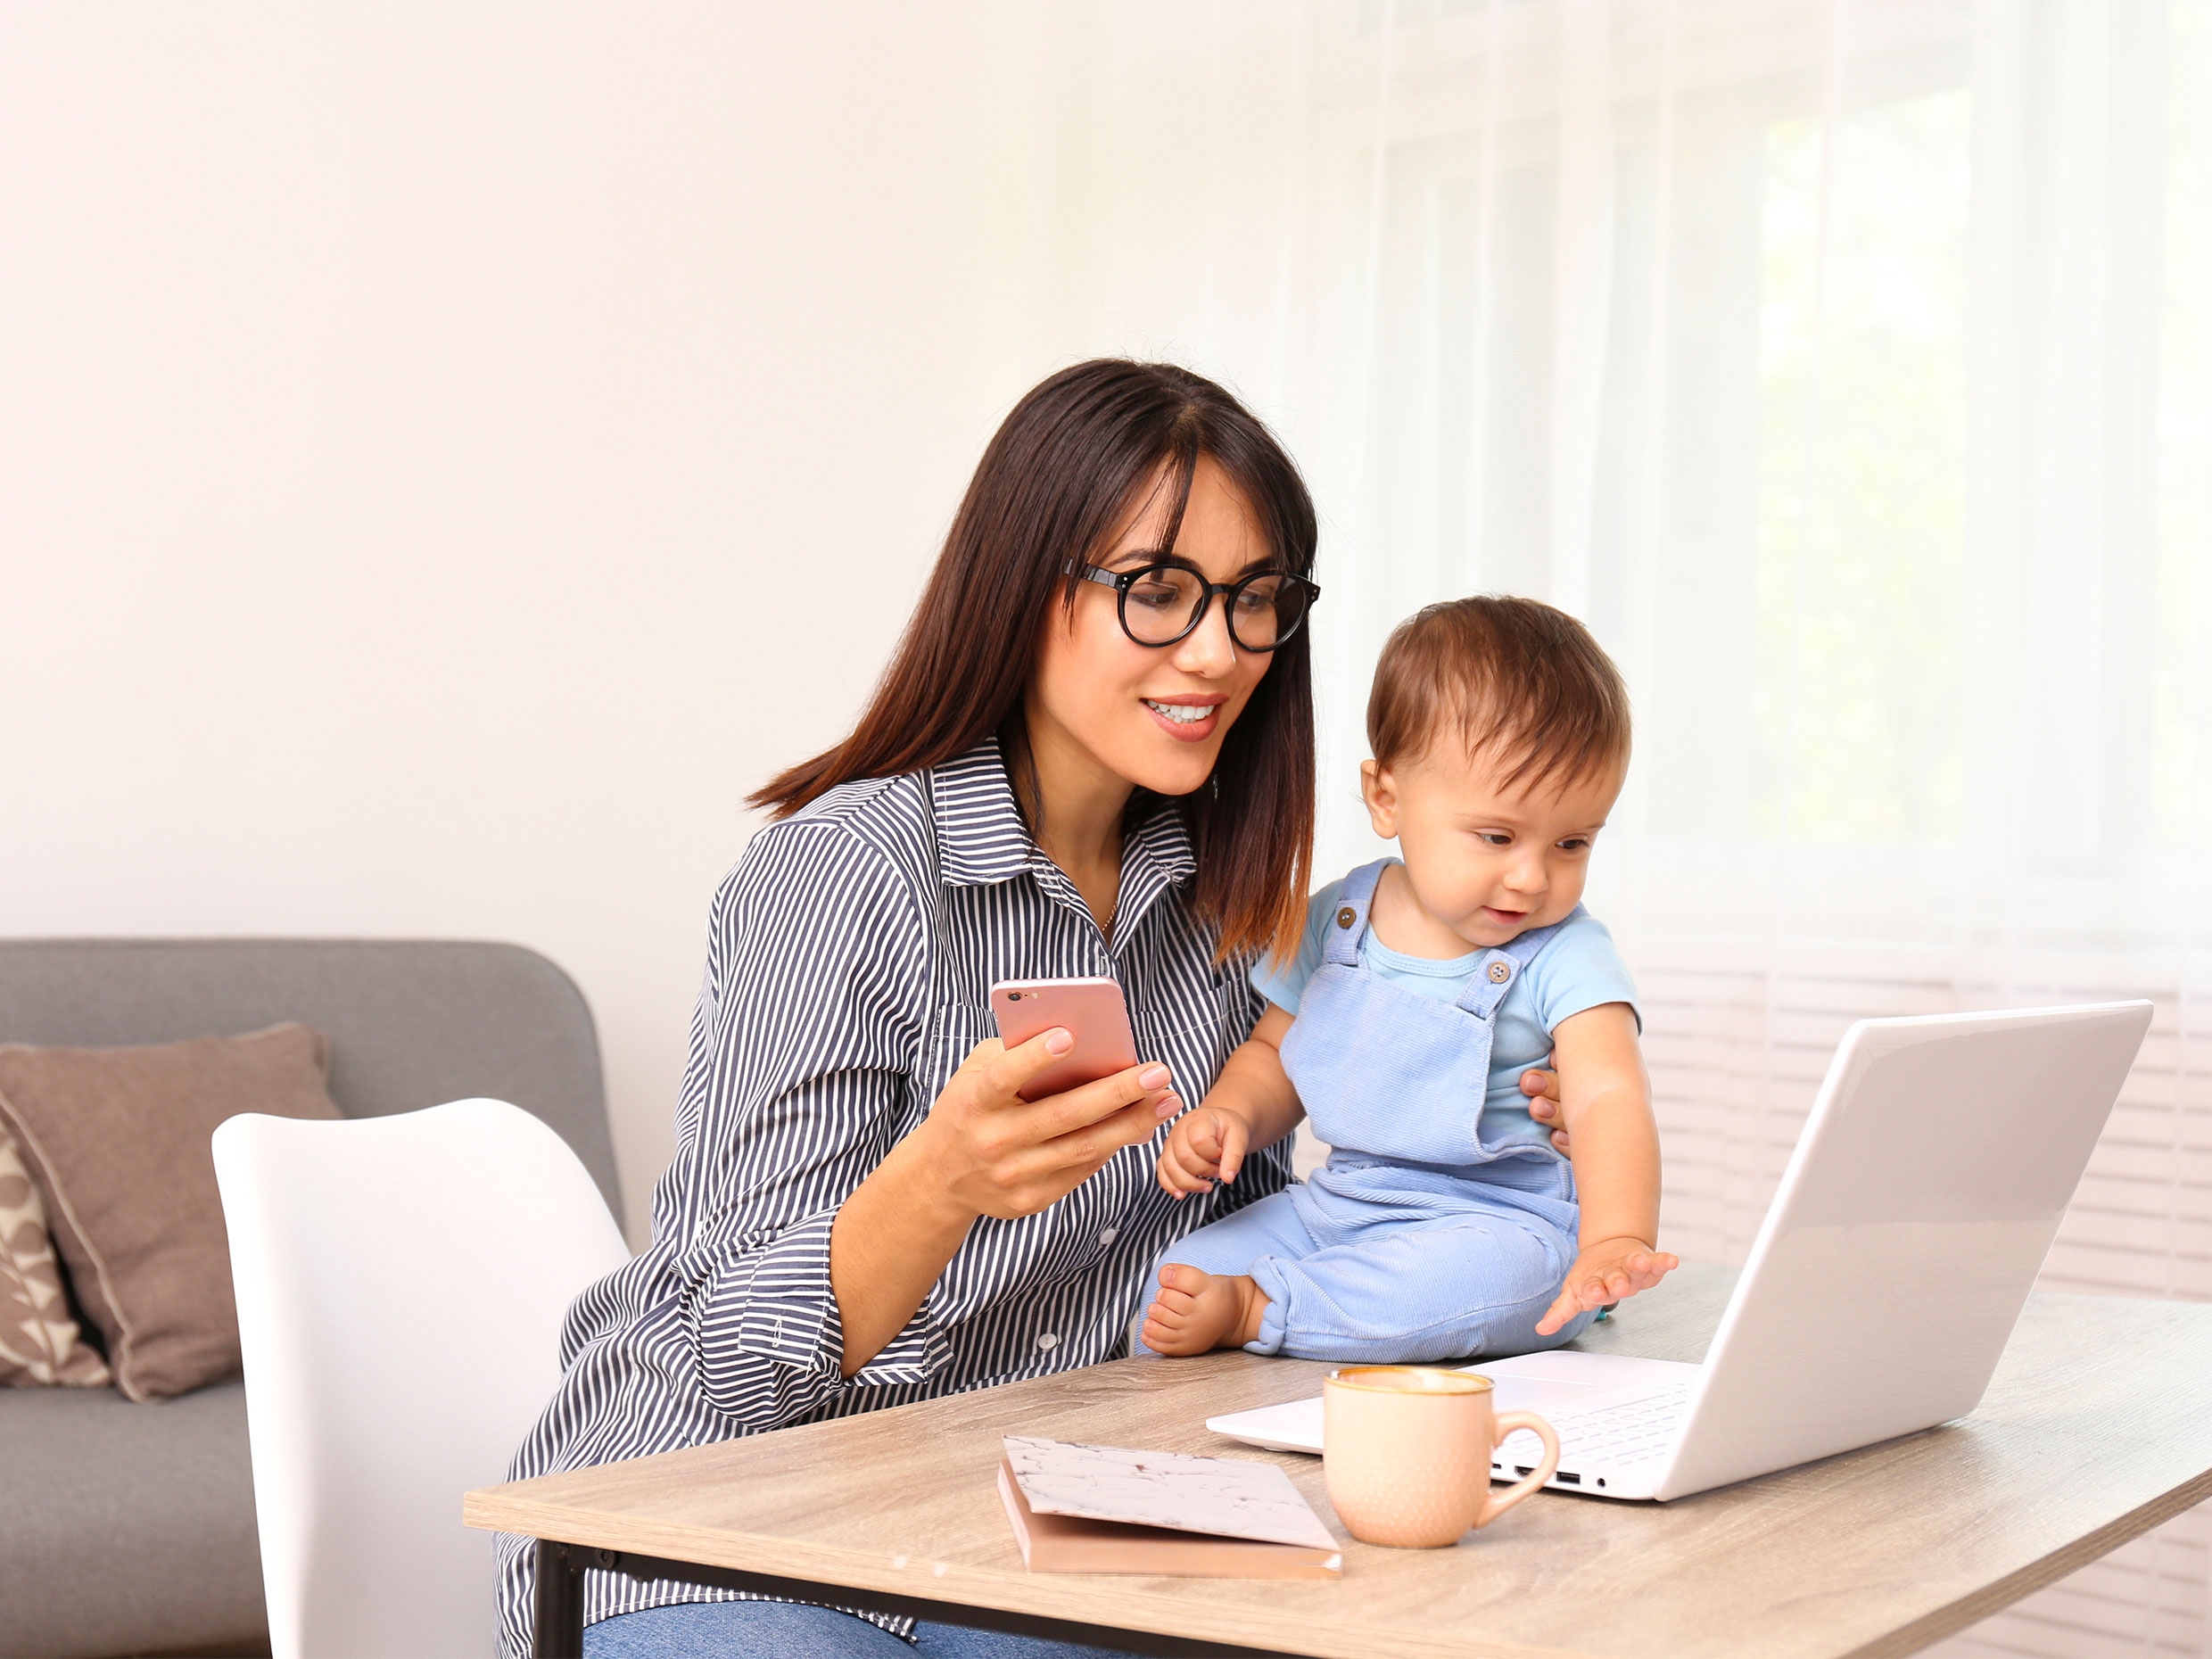 Mother with young child sitting in front of laptop.